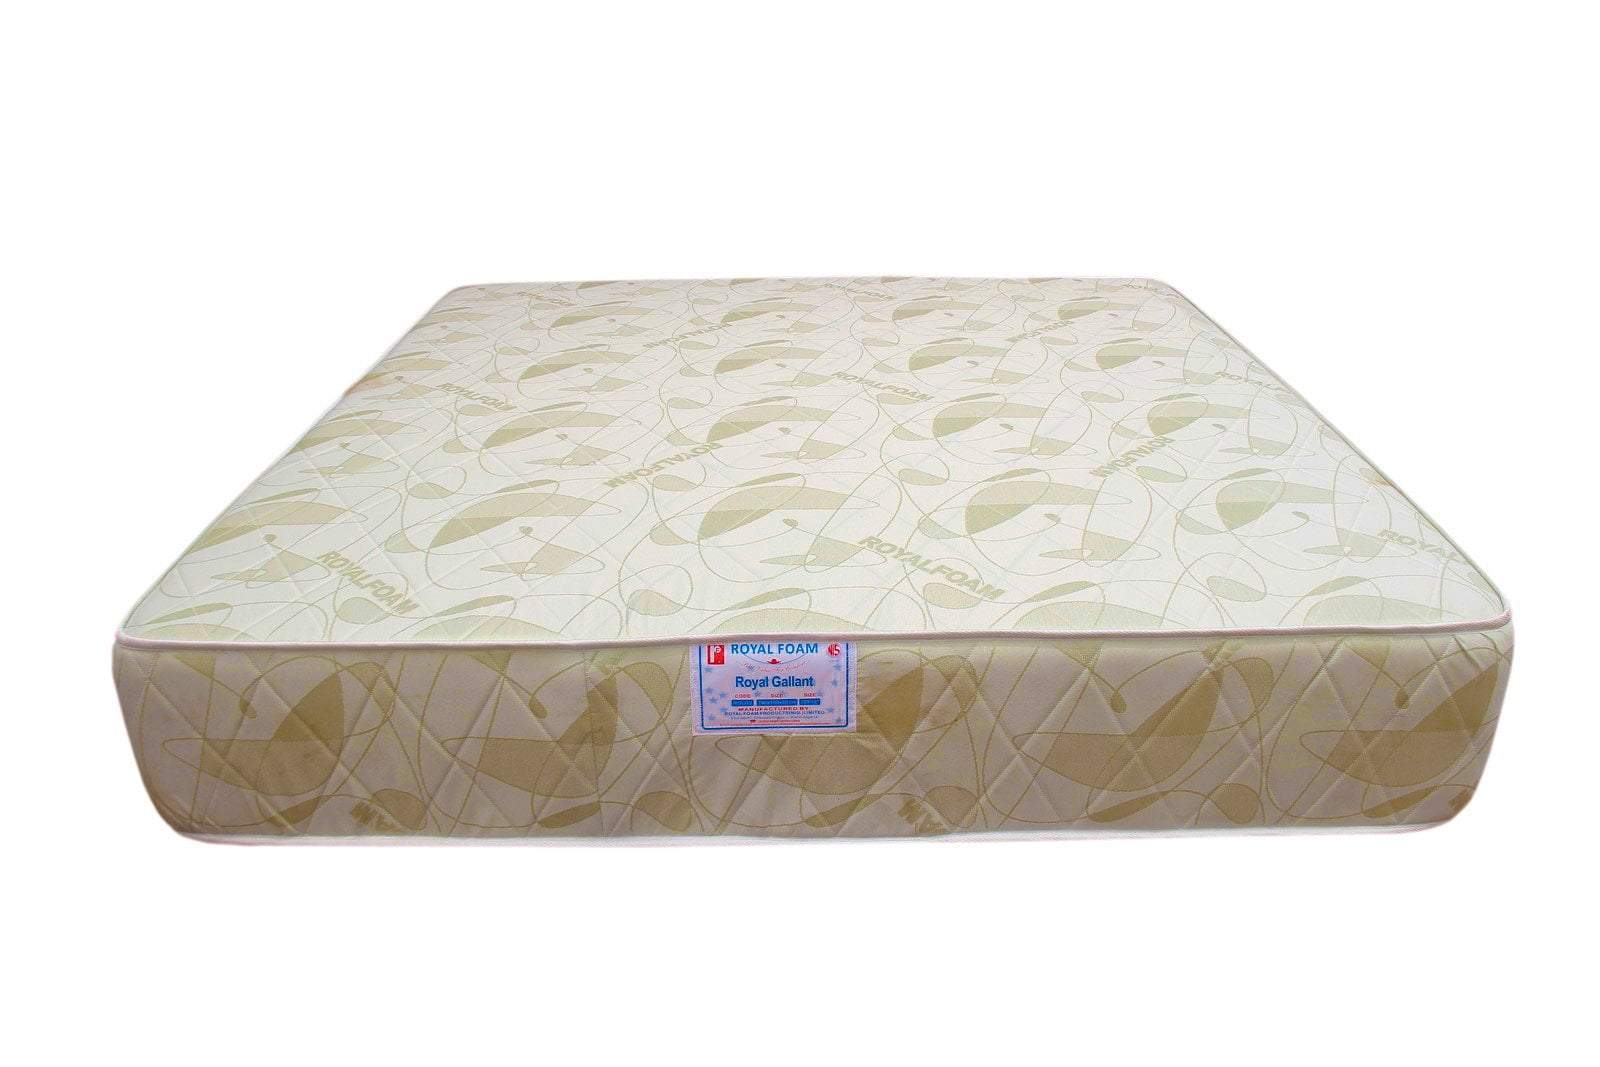 Royal Gallant Plus JACQUARD fabric-Fully Quilted Mattress 190 X 105 X 20 CM(6ft x 3.5ft x 8inches) Single(Lagos Only)